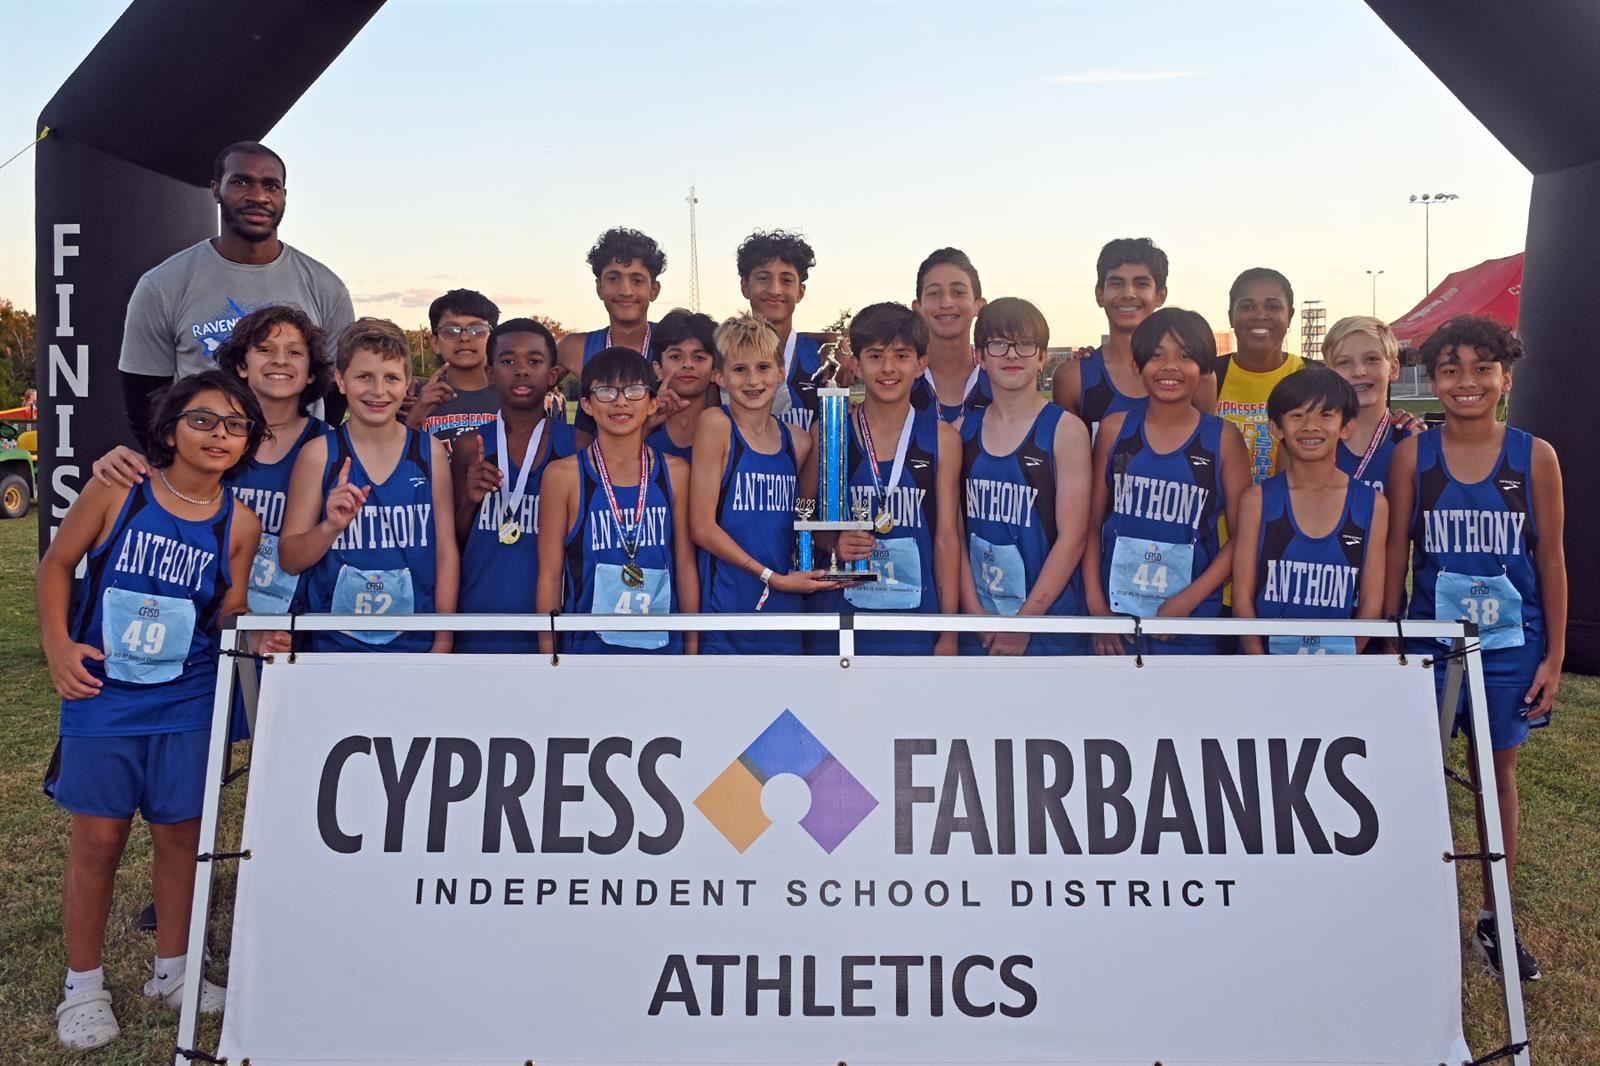 Salyards Middle School won the seventh grade boys’ cross country team title with 32 points.